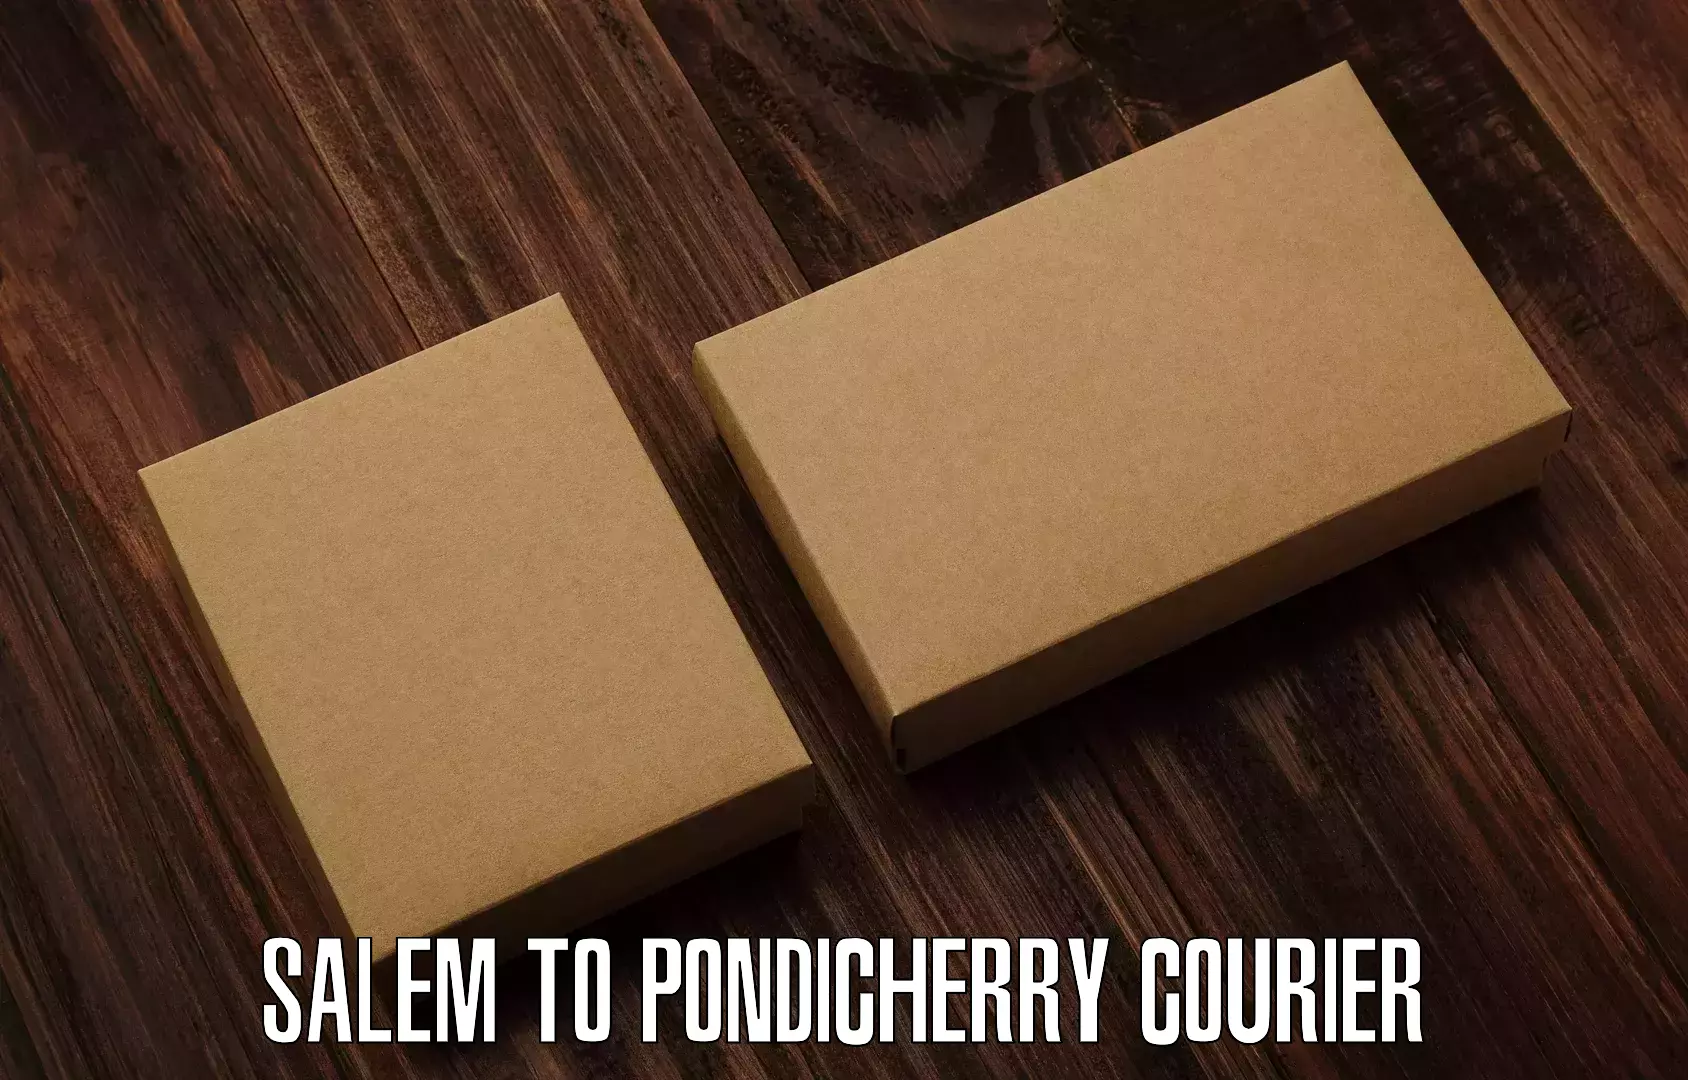 On-demand delivery in Salem to Pondicherry